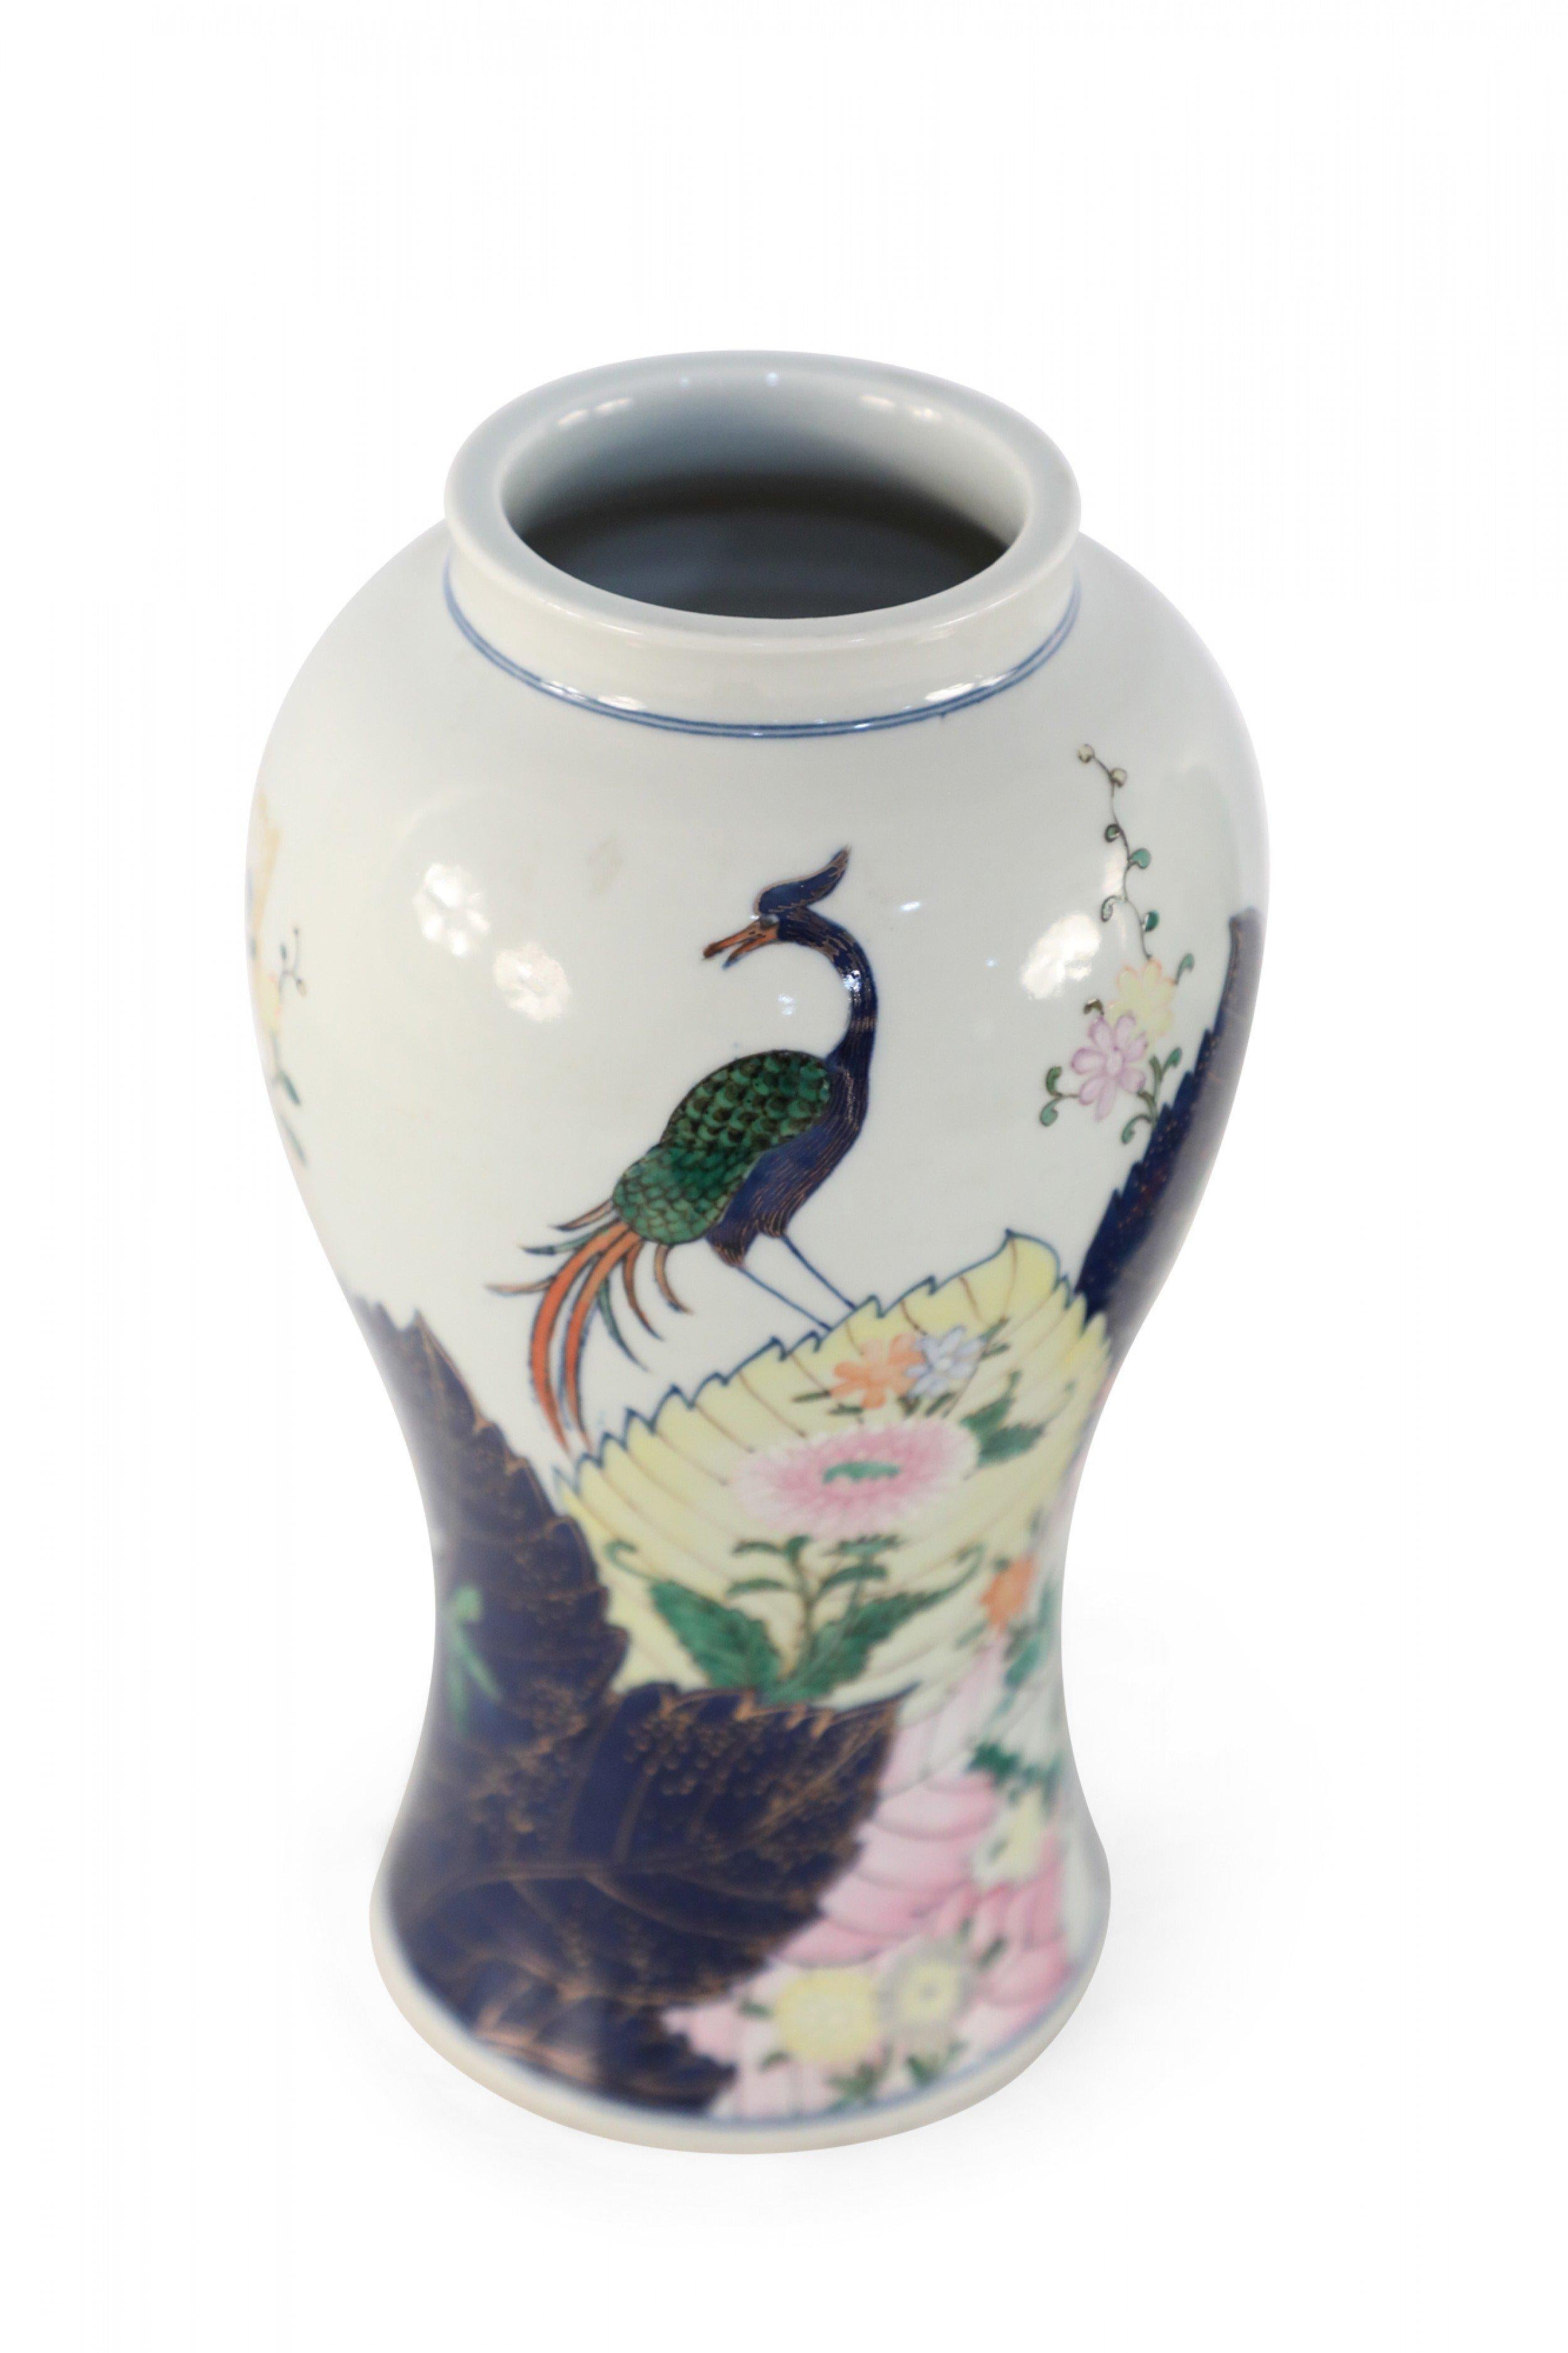 Pair of Chinese white porcelain vases with urn-shaped forms decorated in large scale dark blue leaves outlined in gold, amid green, yellow and pink foliage and flora topped with blue peacocks (priced as pair).
   